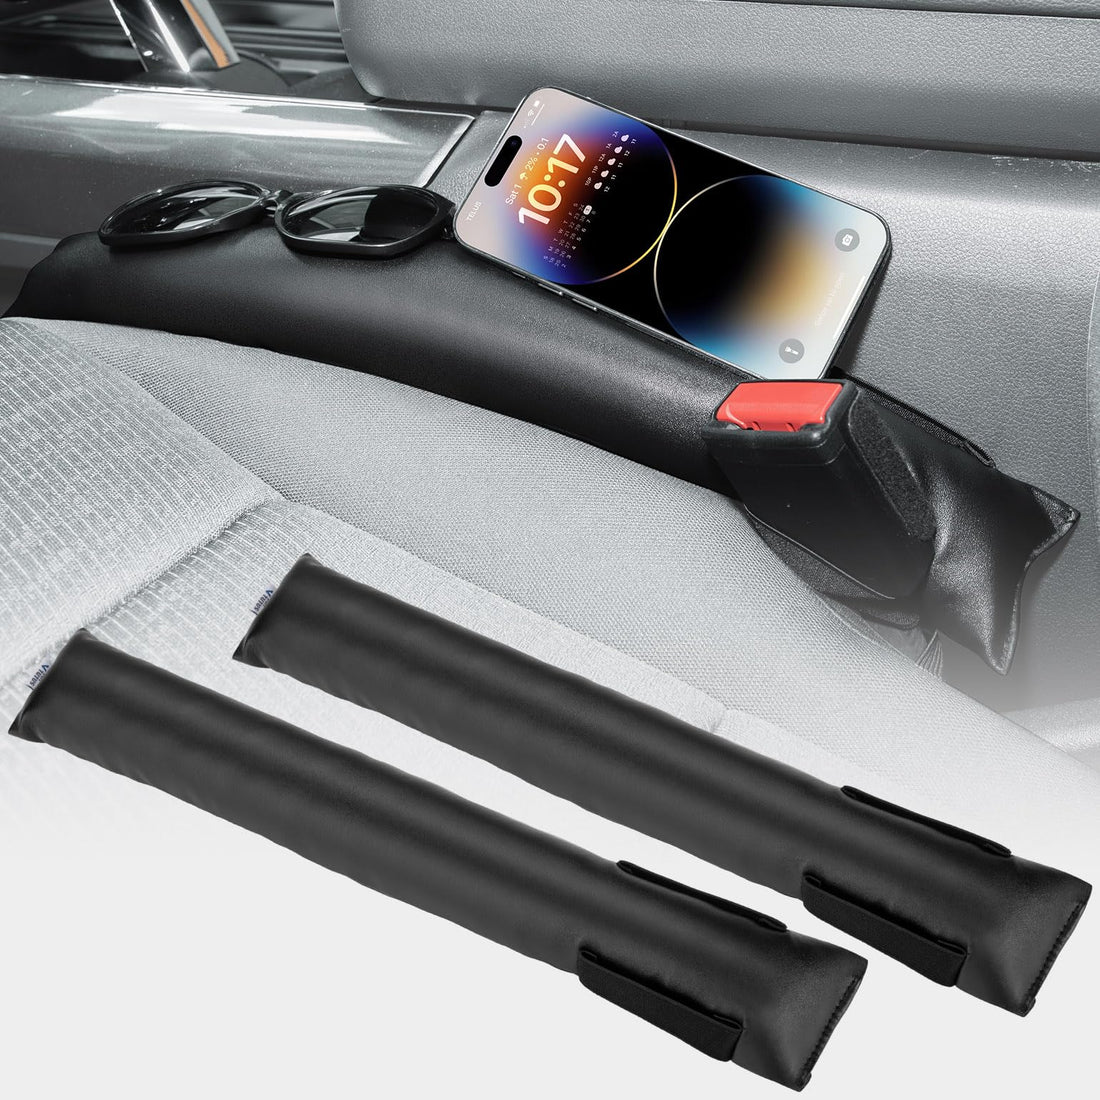 Car Seat Gap Filler Organizer 2 Pcs Short, PU Leather Waterproof Universal for Car SUV Truck for Cellphone